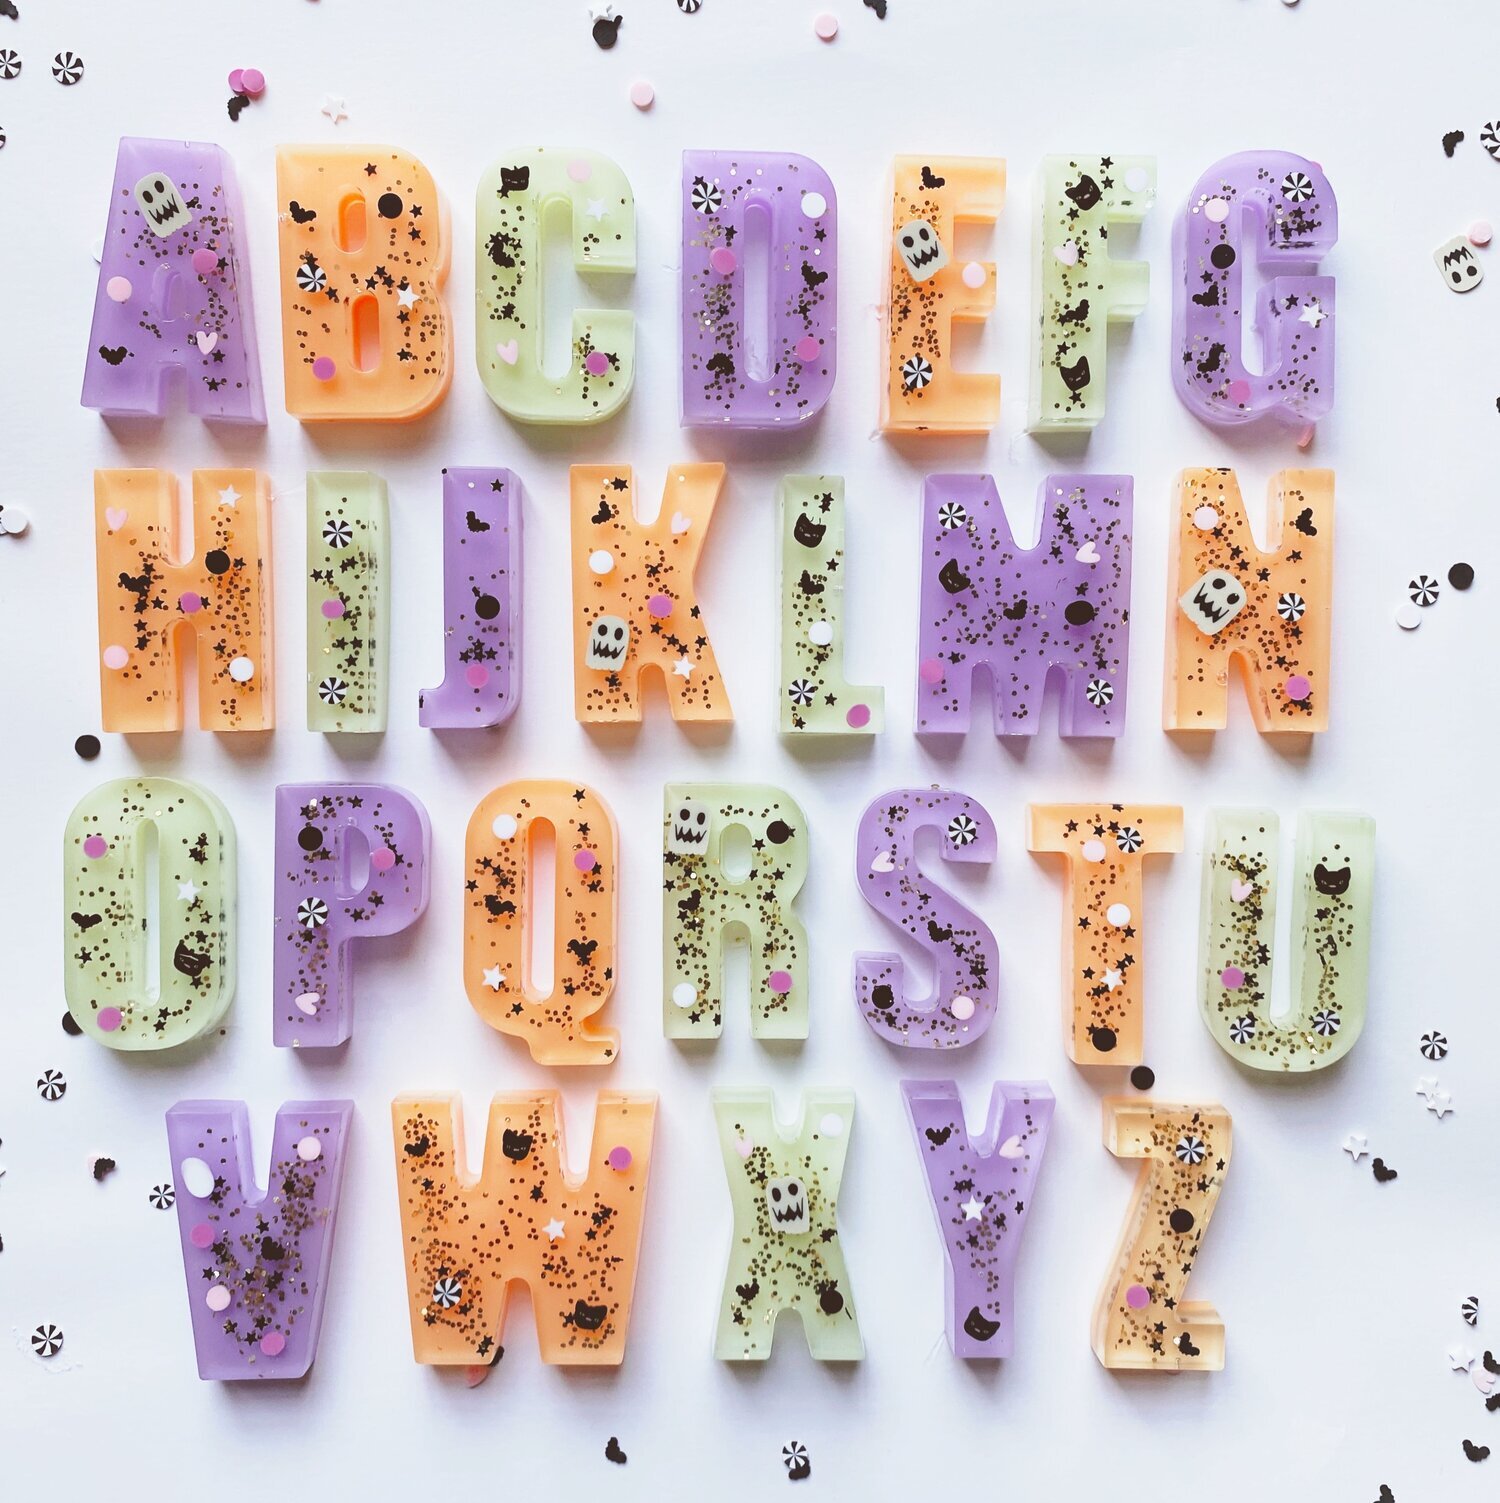 Letterette creates sparkly, happy little building blocks for early child literacy.